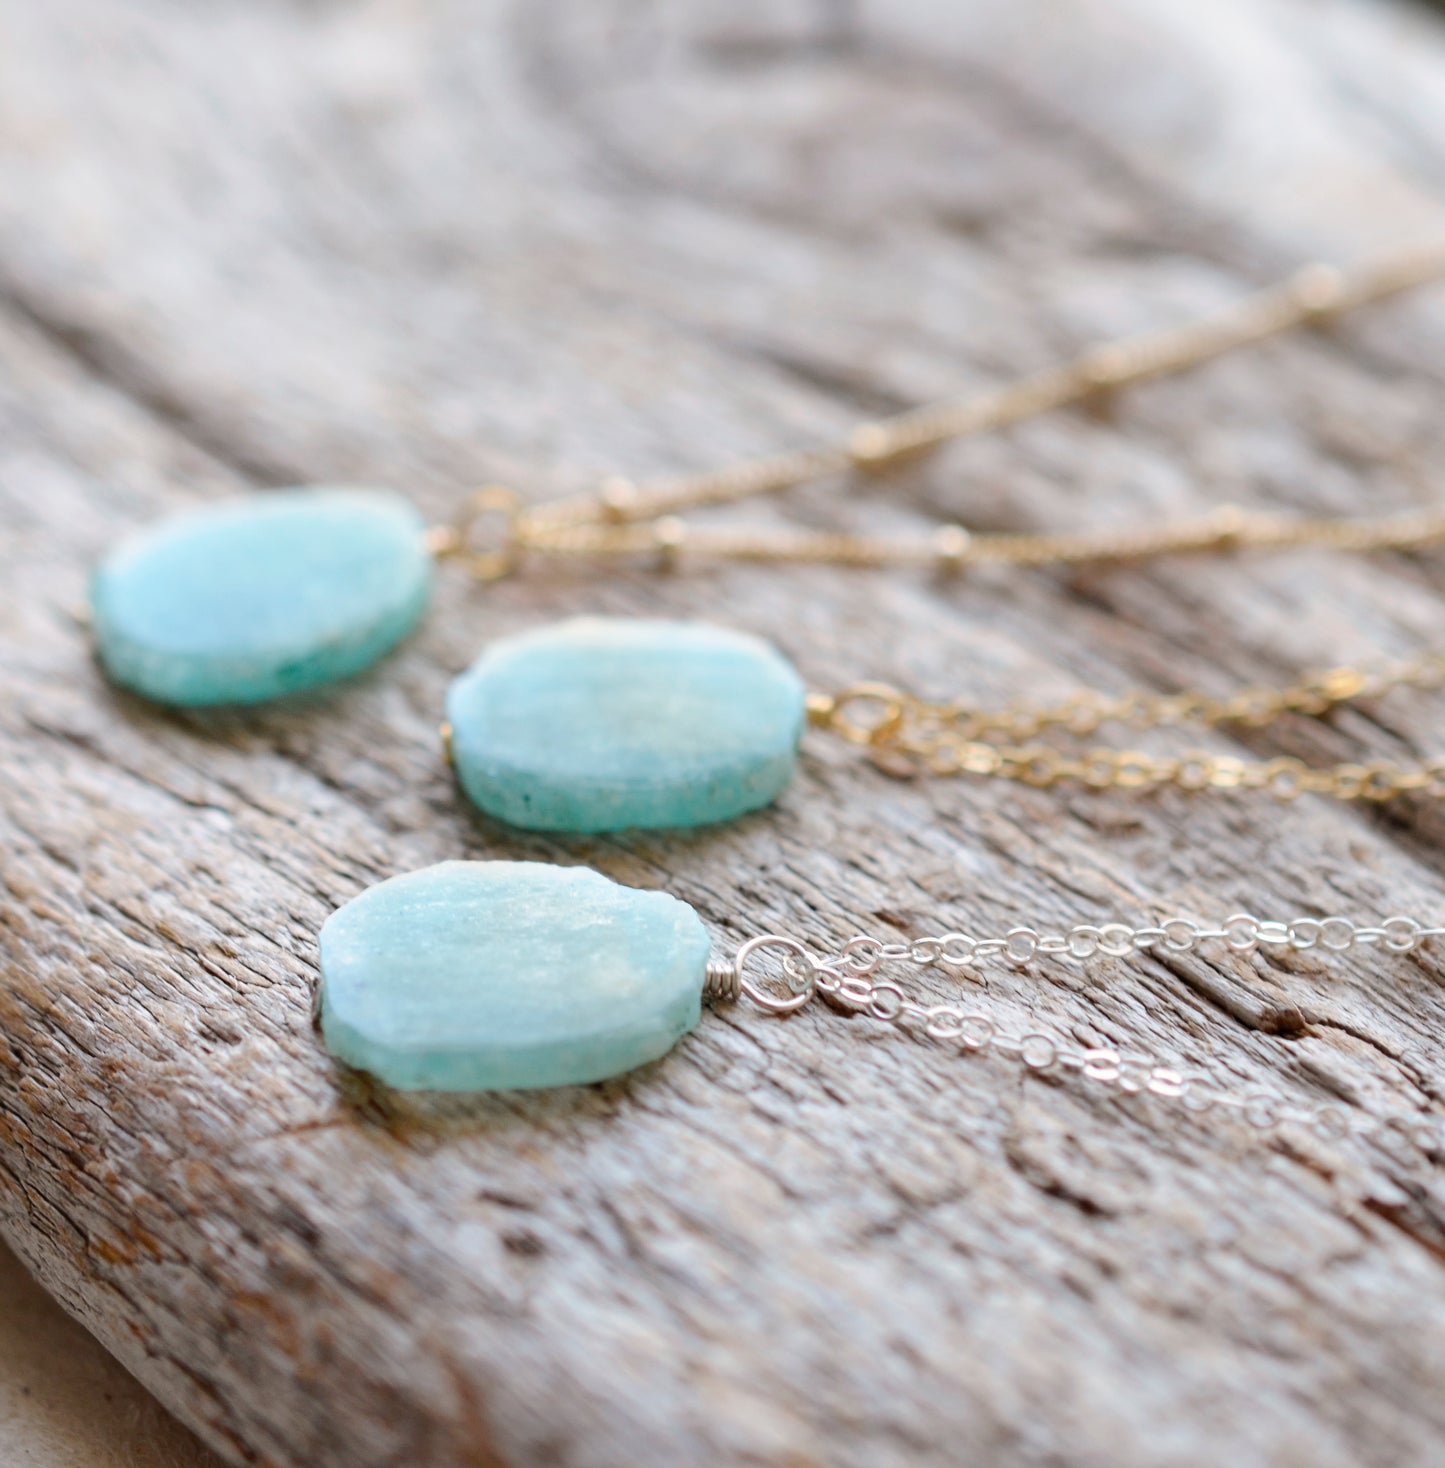 Aqua blue amazonite slice gemstone set onto a sterling silver  or 14k gold filled chains. The stone is semi oval in shape, but irregular. It's smooth polished, but with raw edges. 